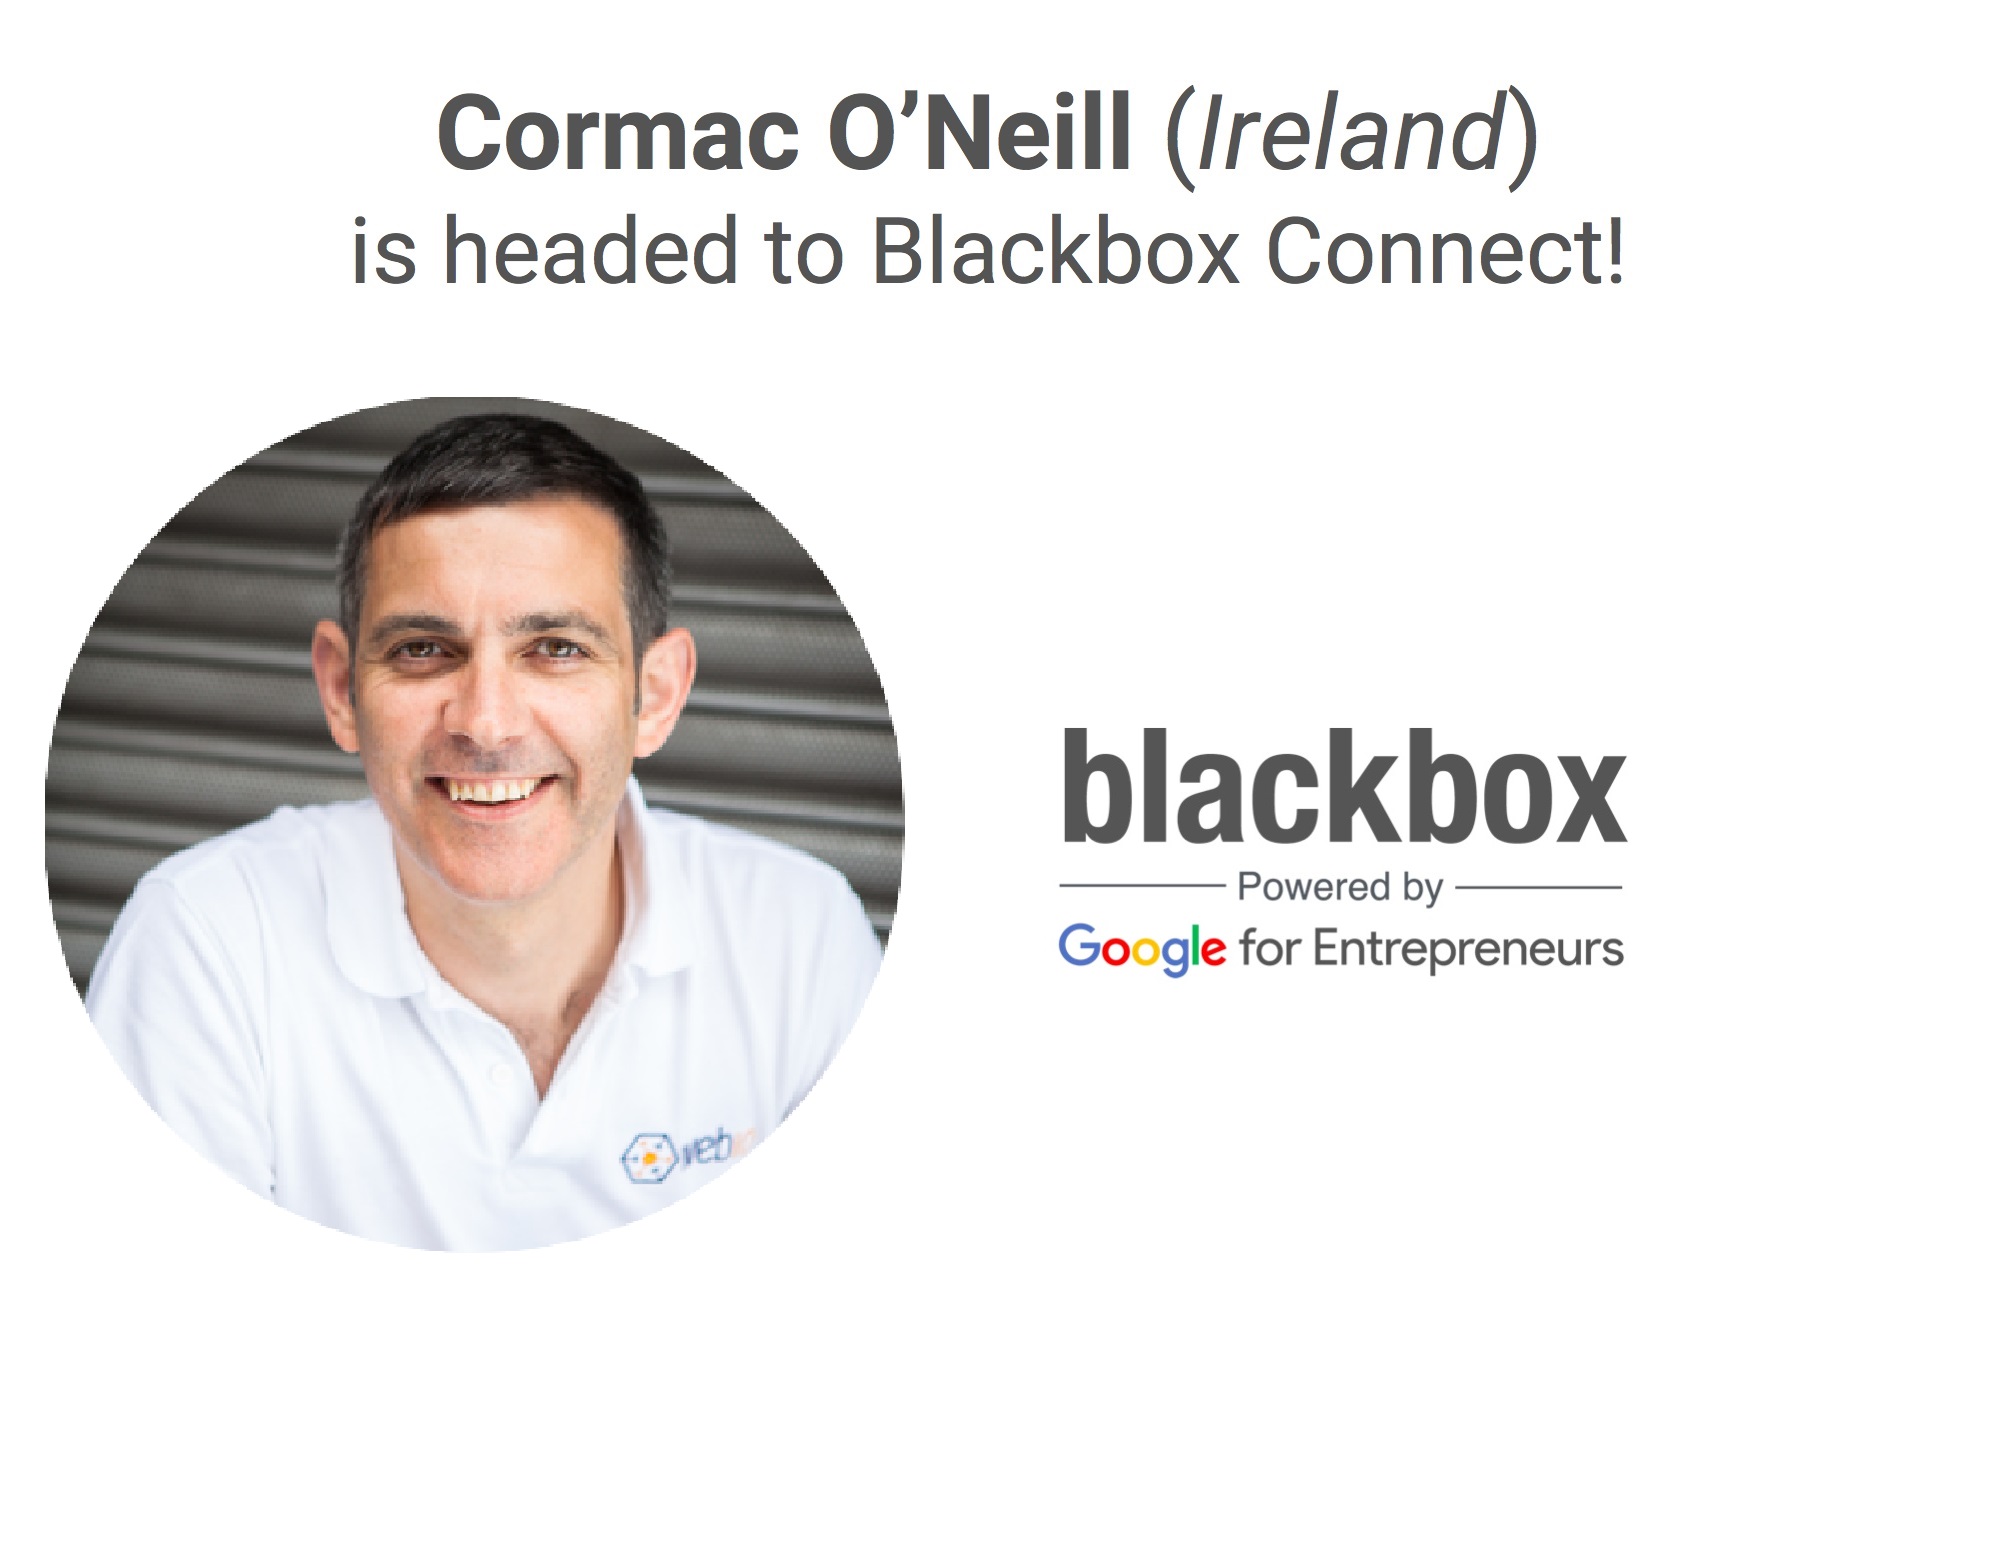 Picture of Cormac O'Neill CEO in Webio the Conversational Middleware Company alongside Blackbox Connect logo